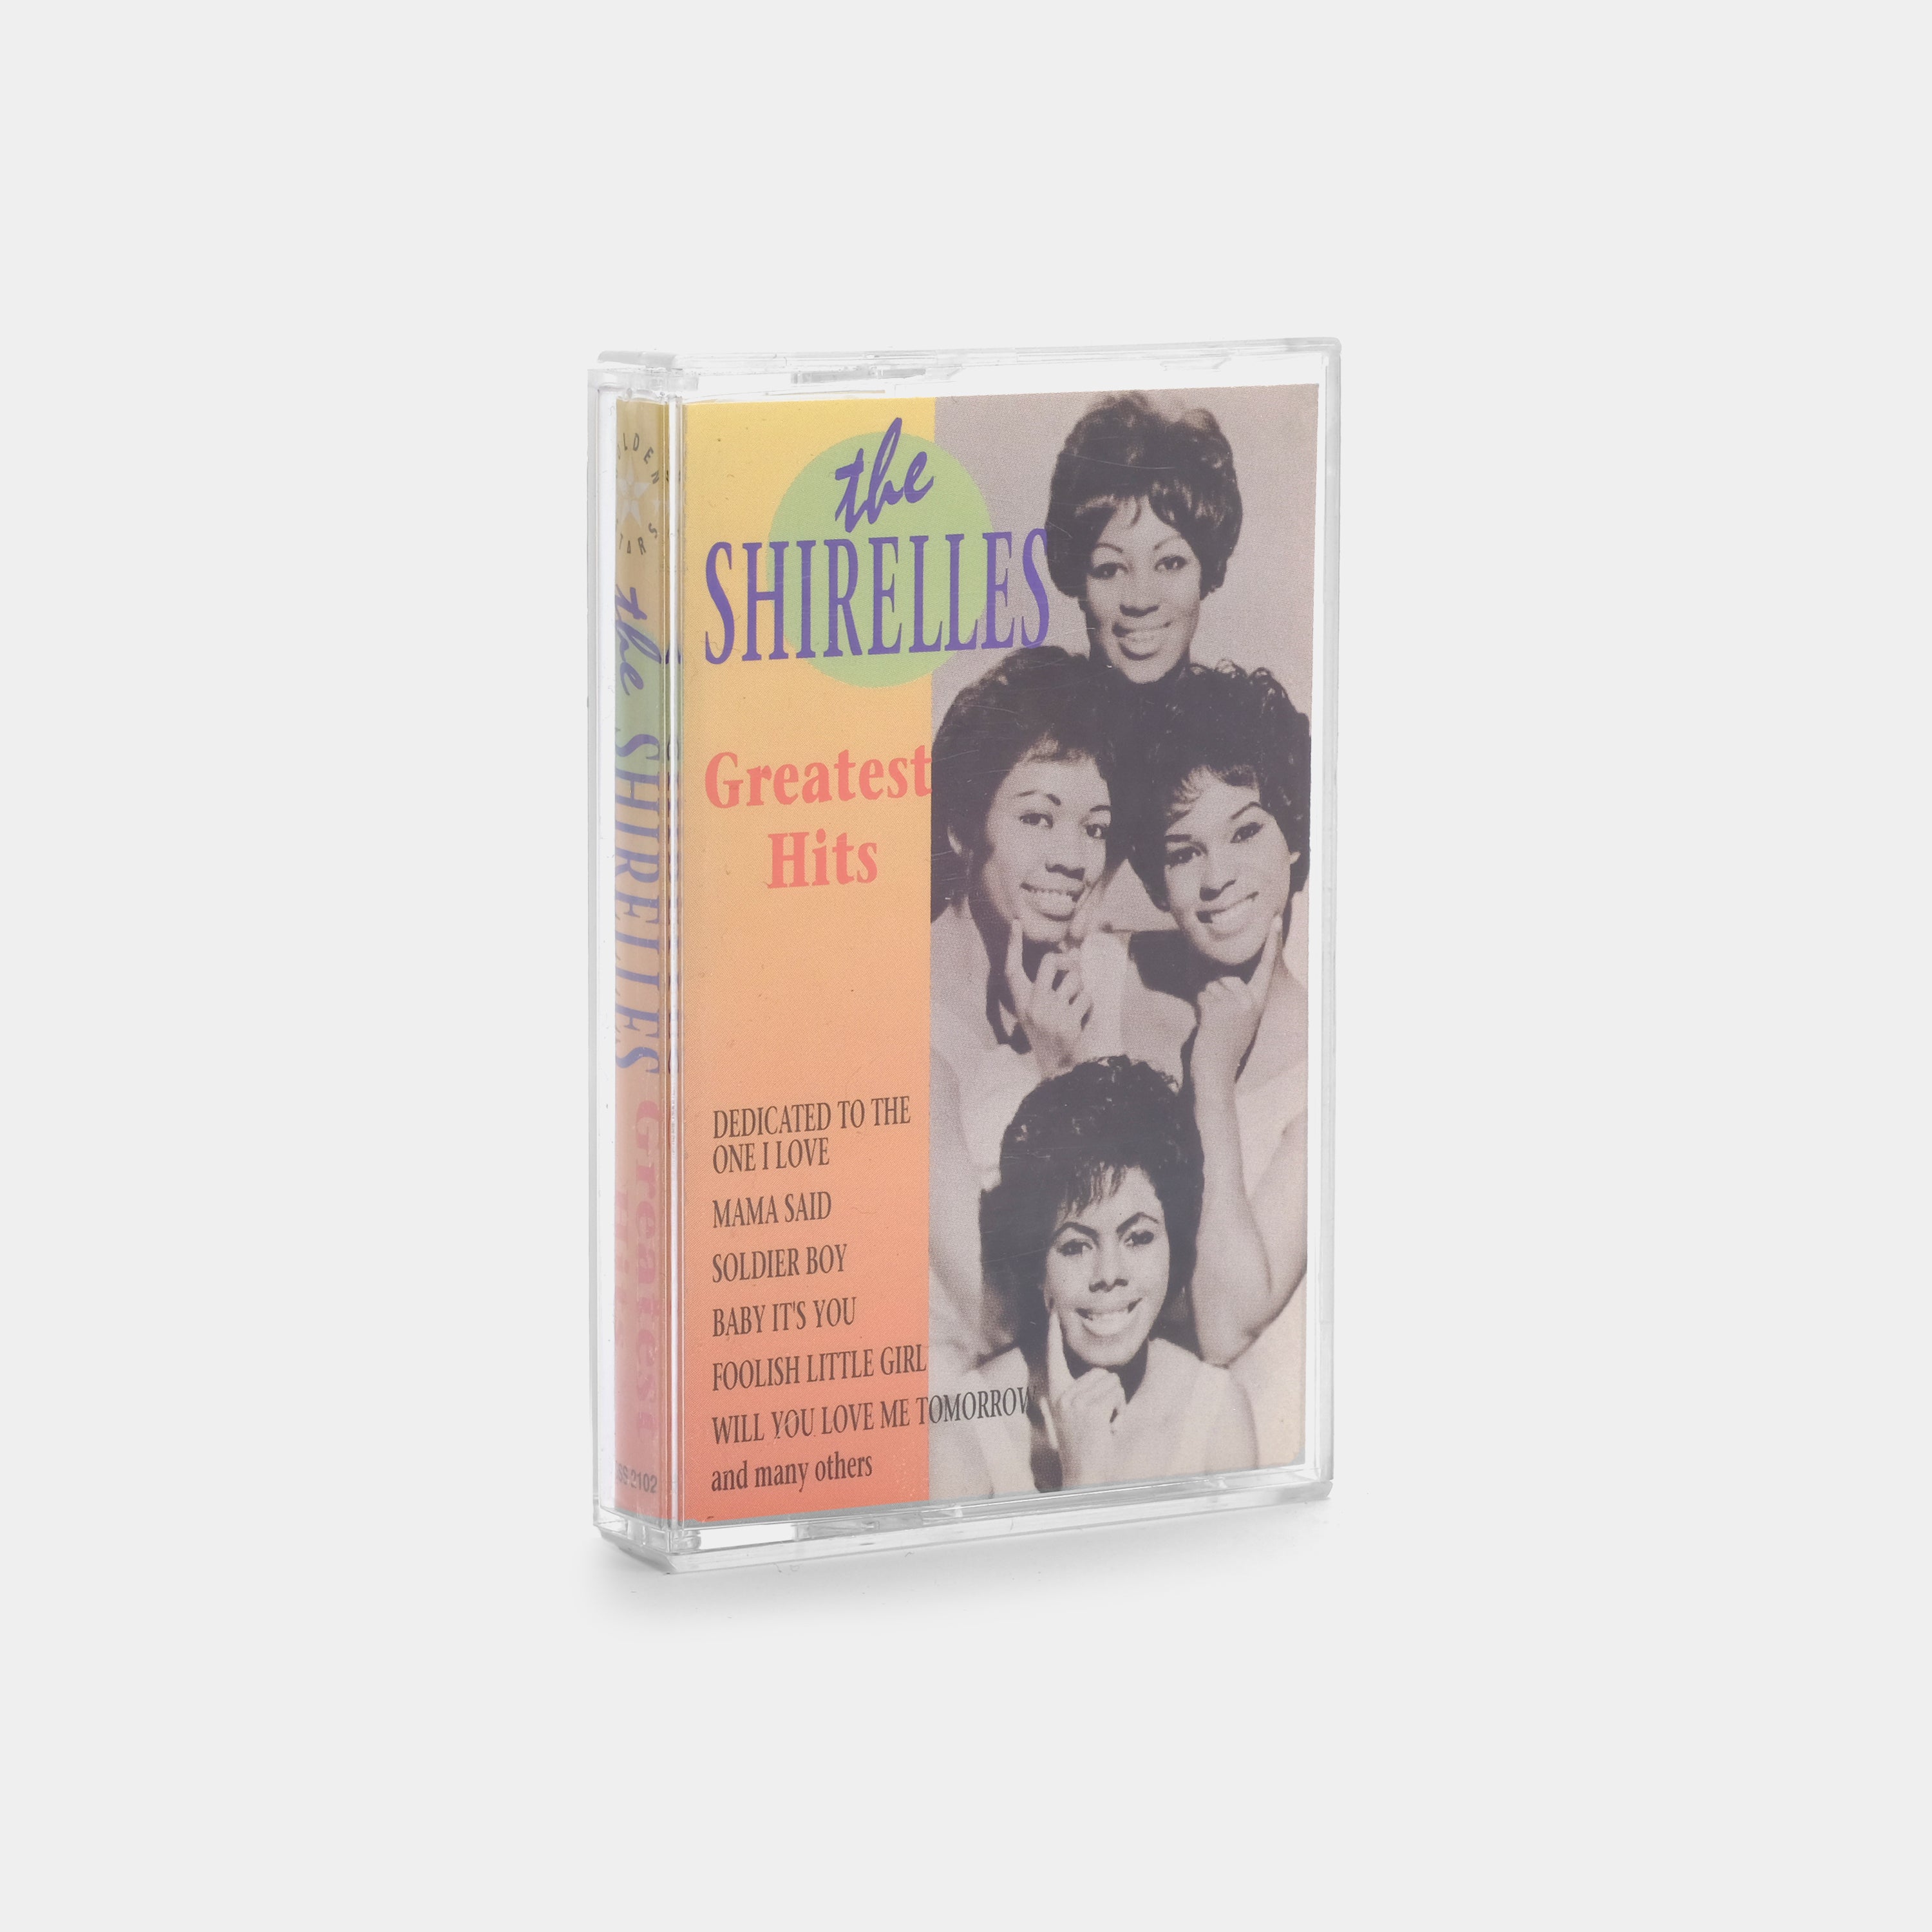 The Shirelles - The 21 Greatest Hits Cassette Tape